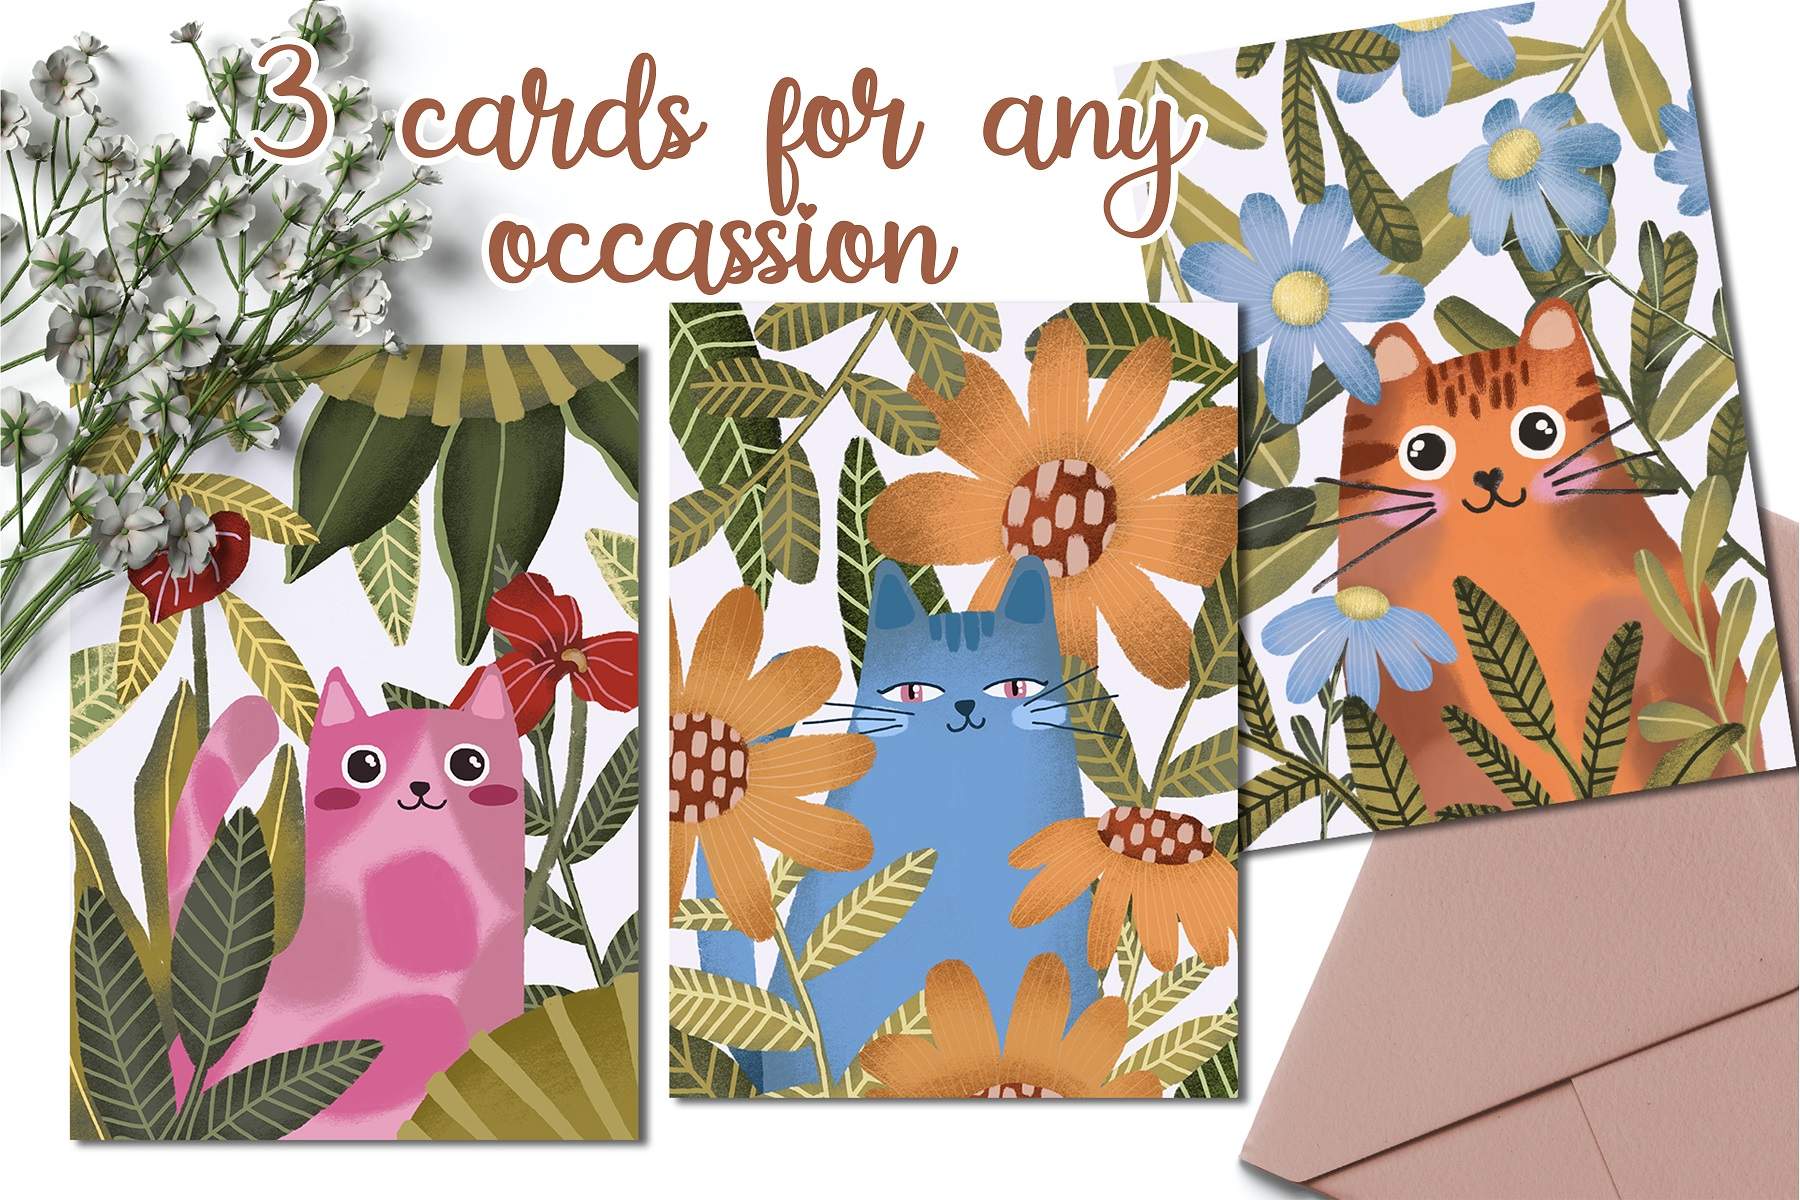 Three cards for any occasion with cats and flowers.